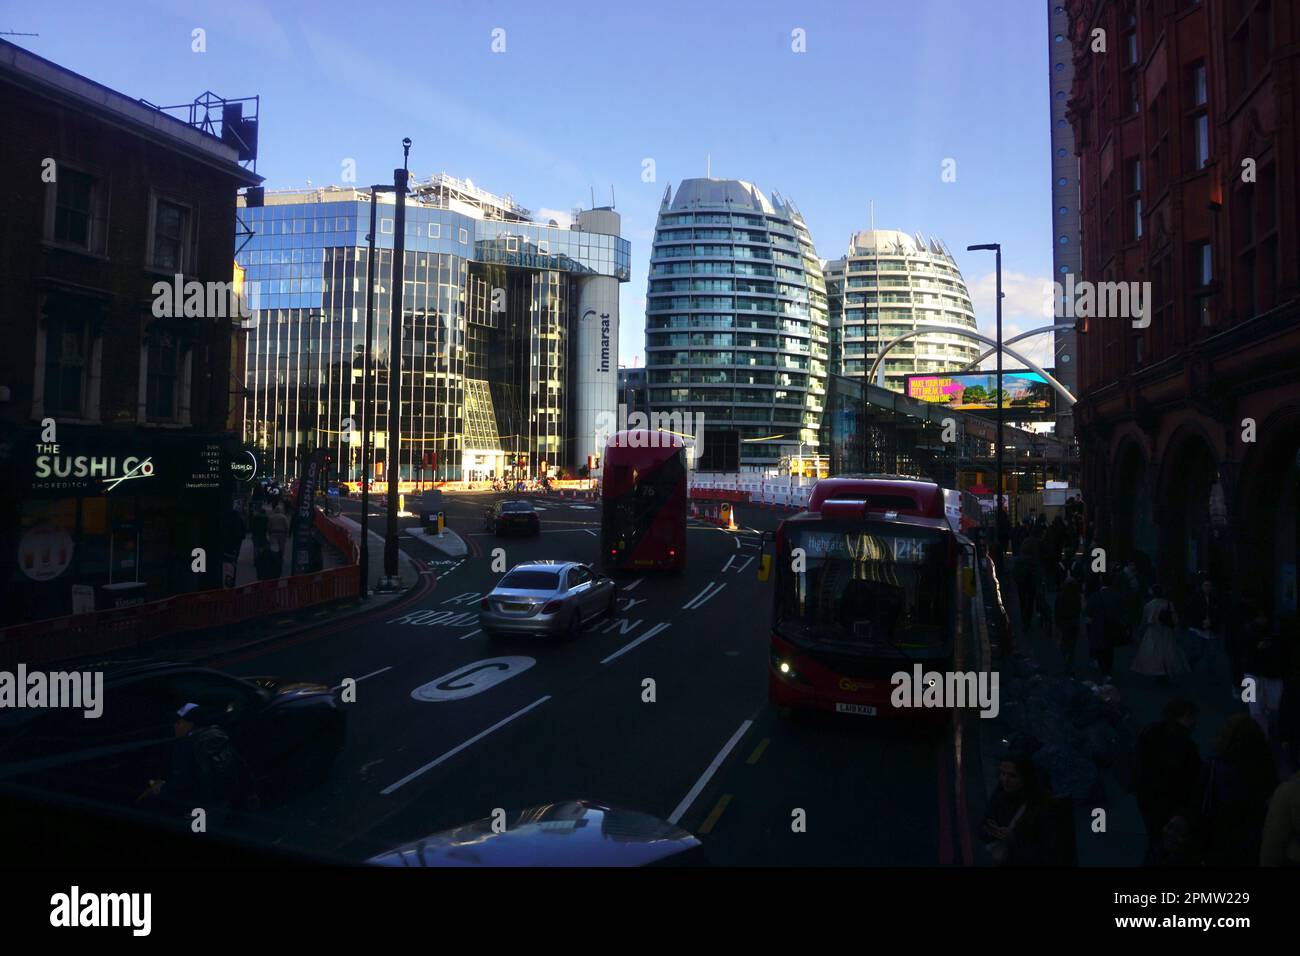 High rise buildings in London, United Kingdom Stock Photo